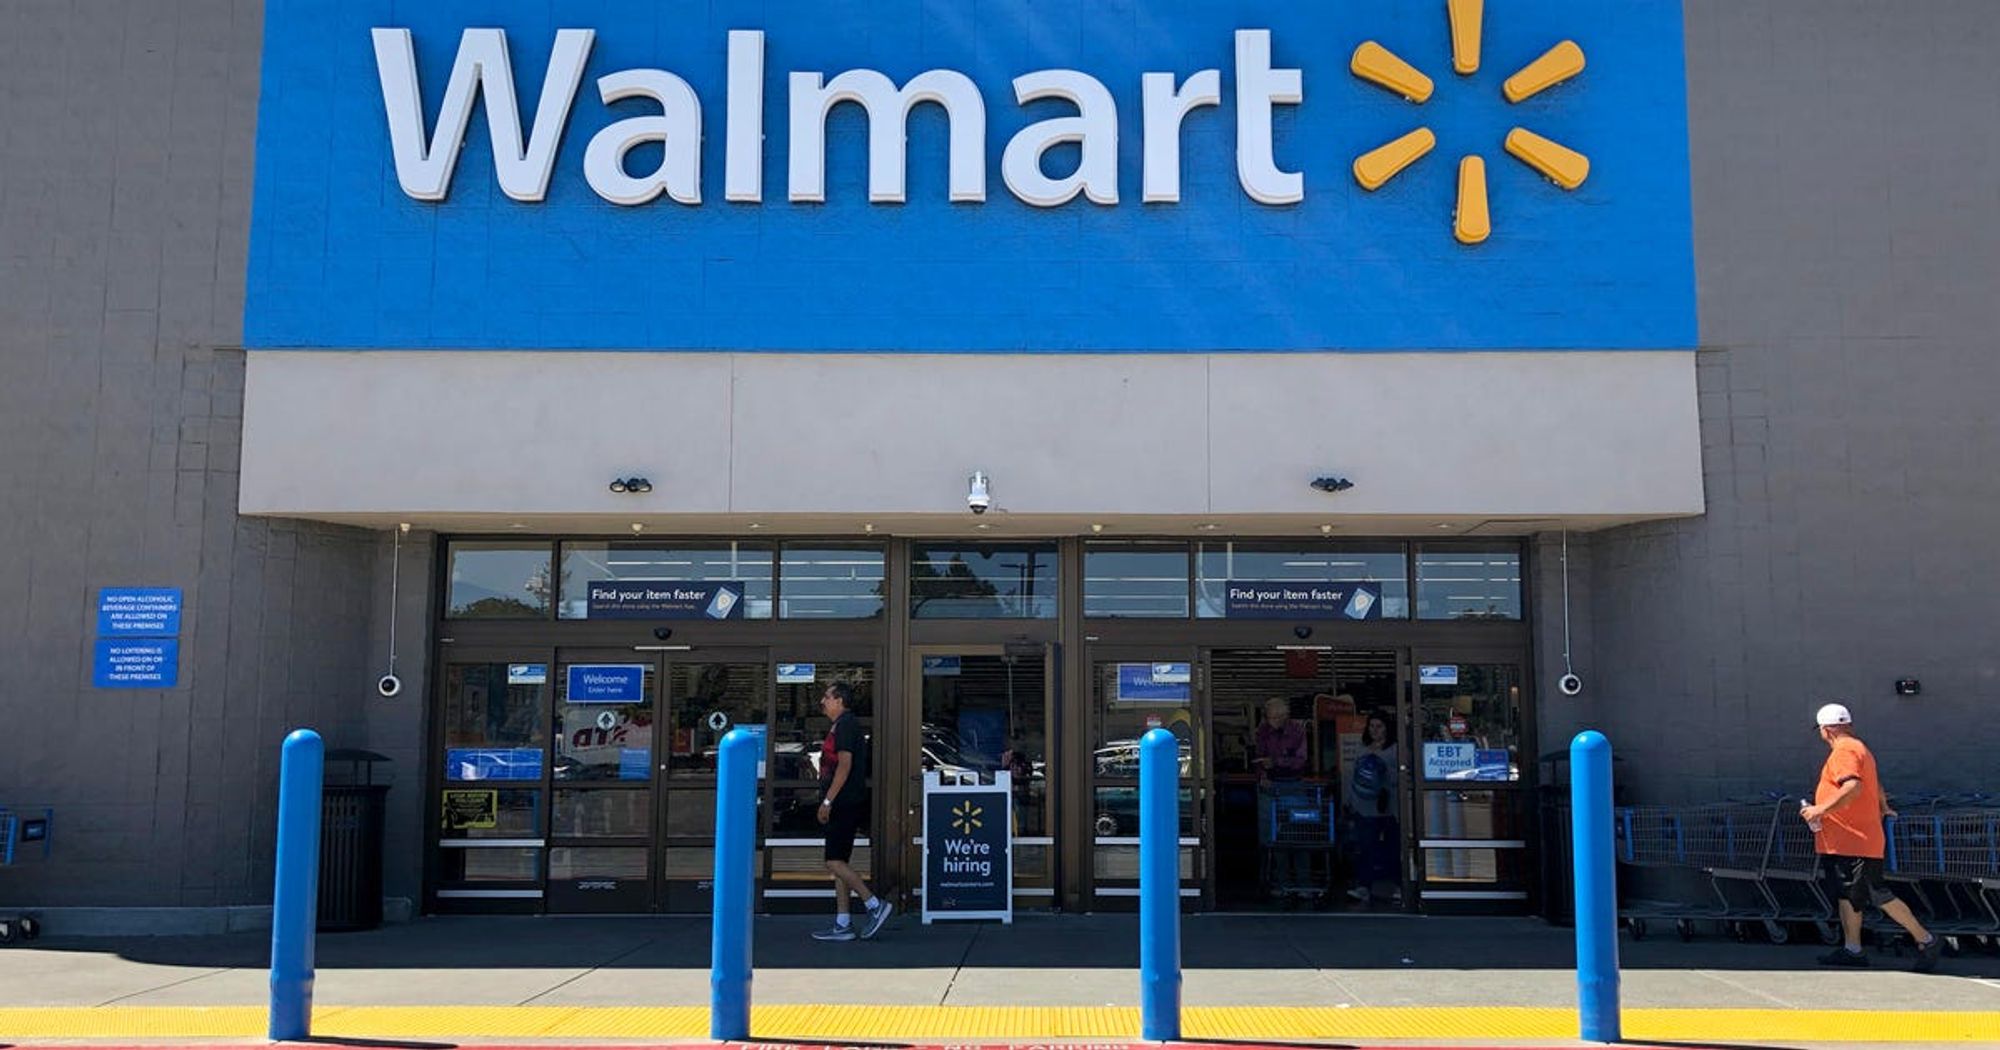 Walmart drone delivery service will bring your orders by air